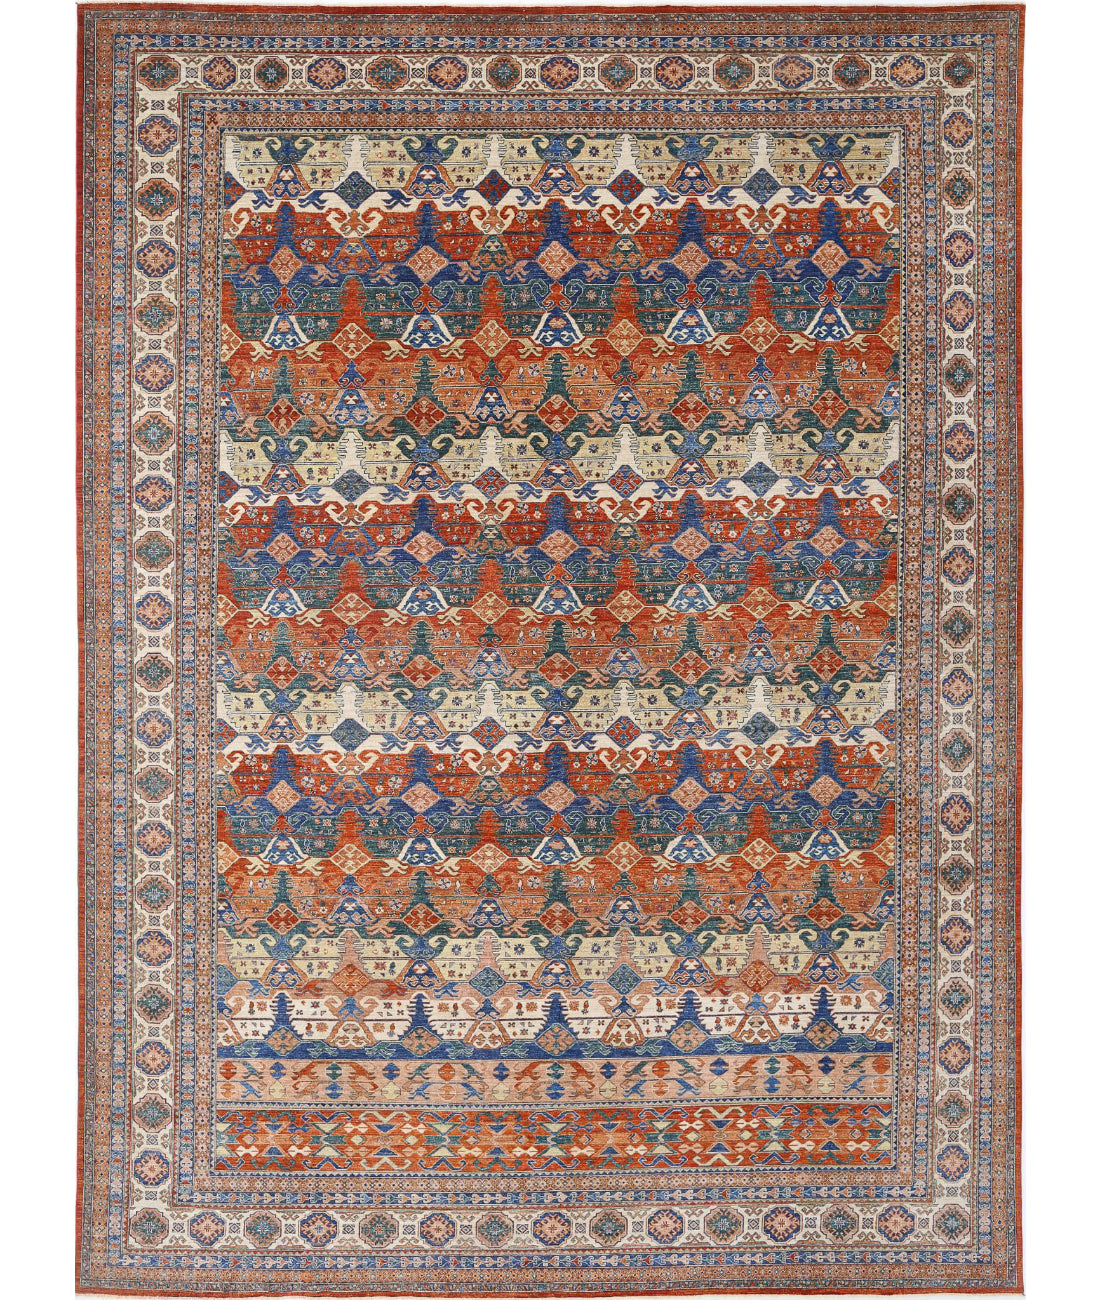 Hand Knotted Nomadic Caucasian Humna Wool Rug - 14&#39;6&#39;&#39; x 19&#39;2&#39;&#39; 14&#39;6&#39;&#39; x 19&#39;2&#39;&#39; (435 X 575) / Multi / Ivory